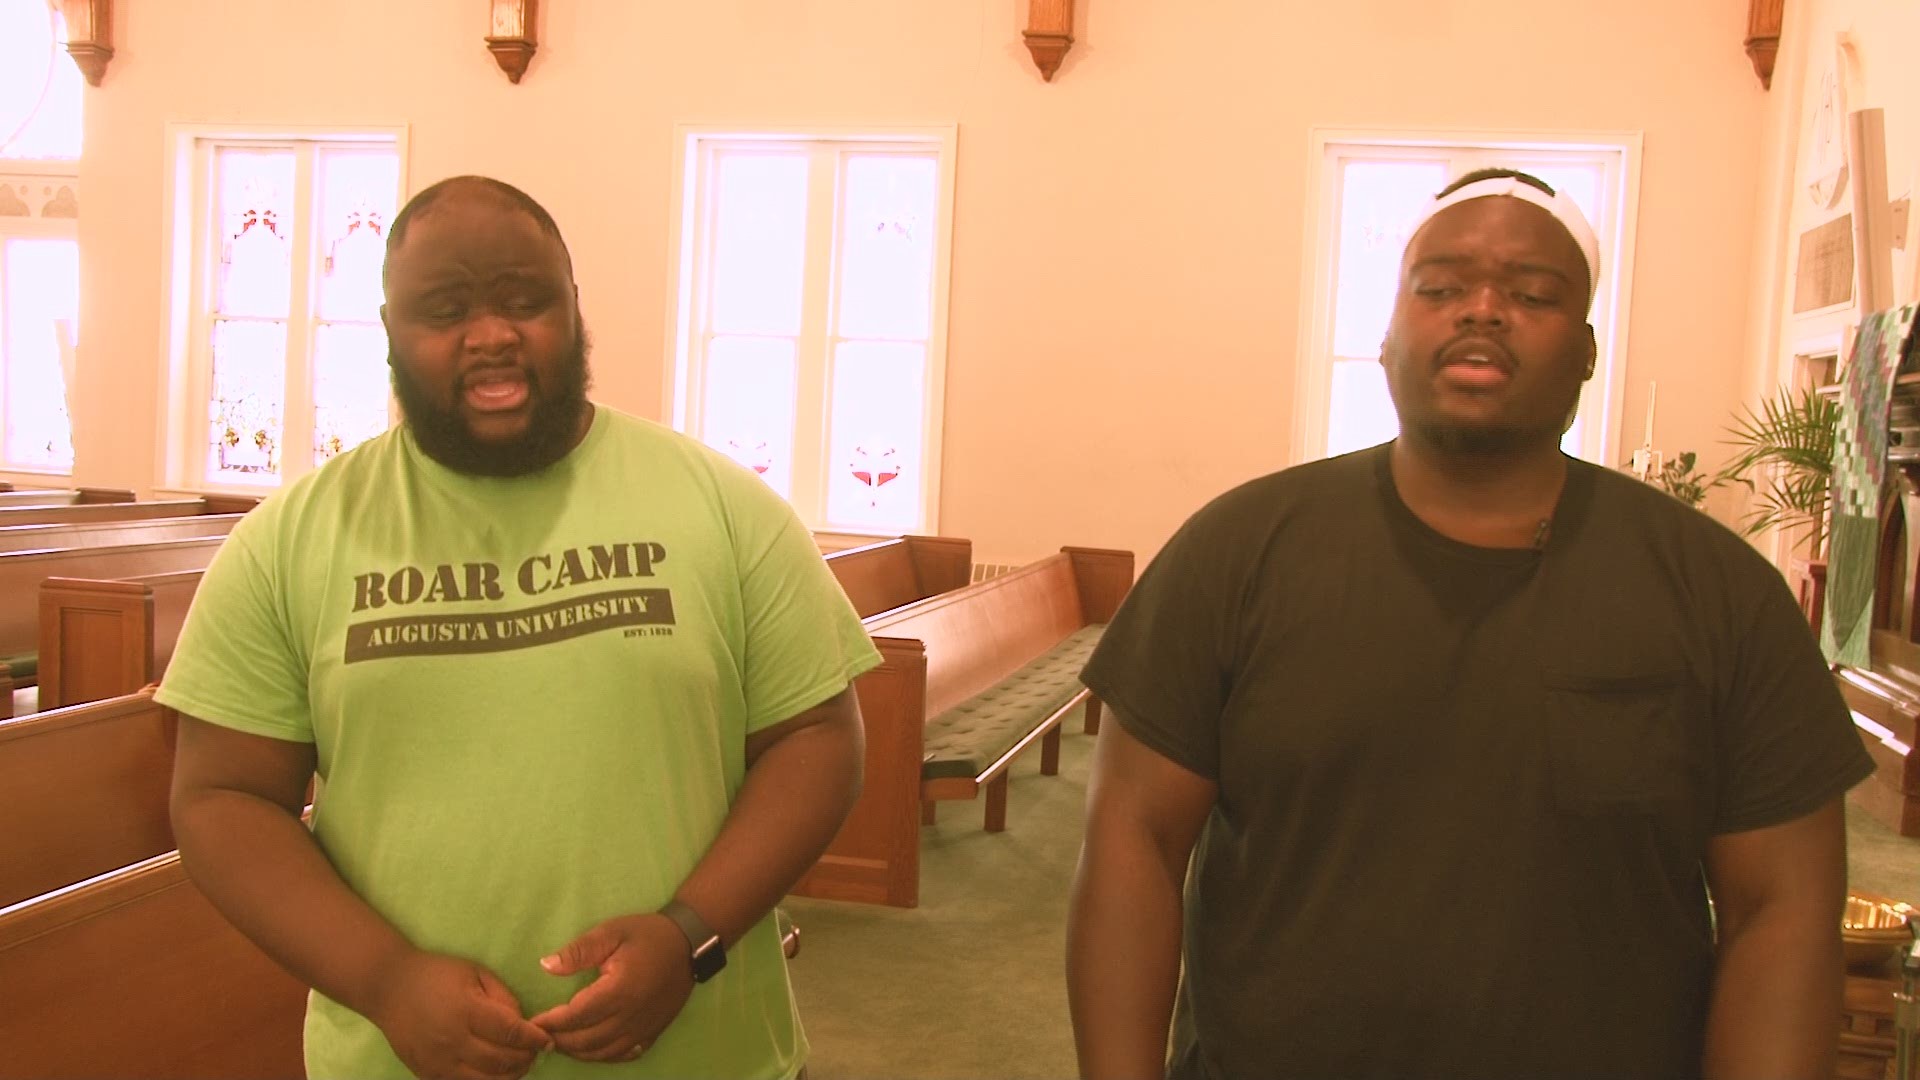 The pair used their angelic voices to carry them into college scholarships. Now, they want to motivate other young men to purse their passions.